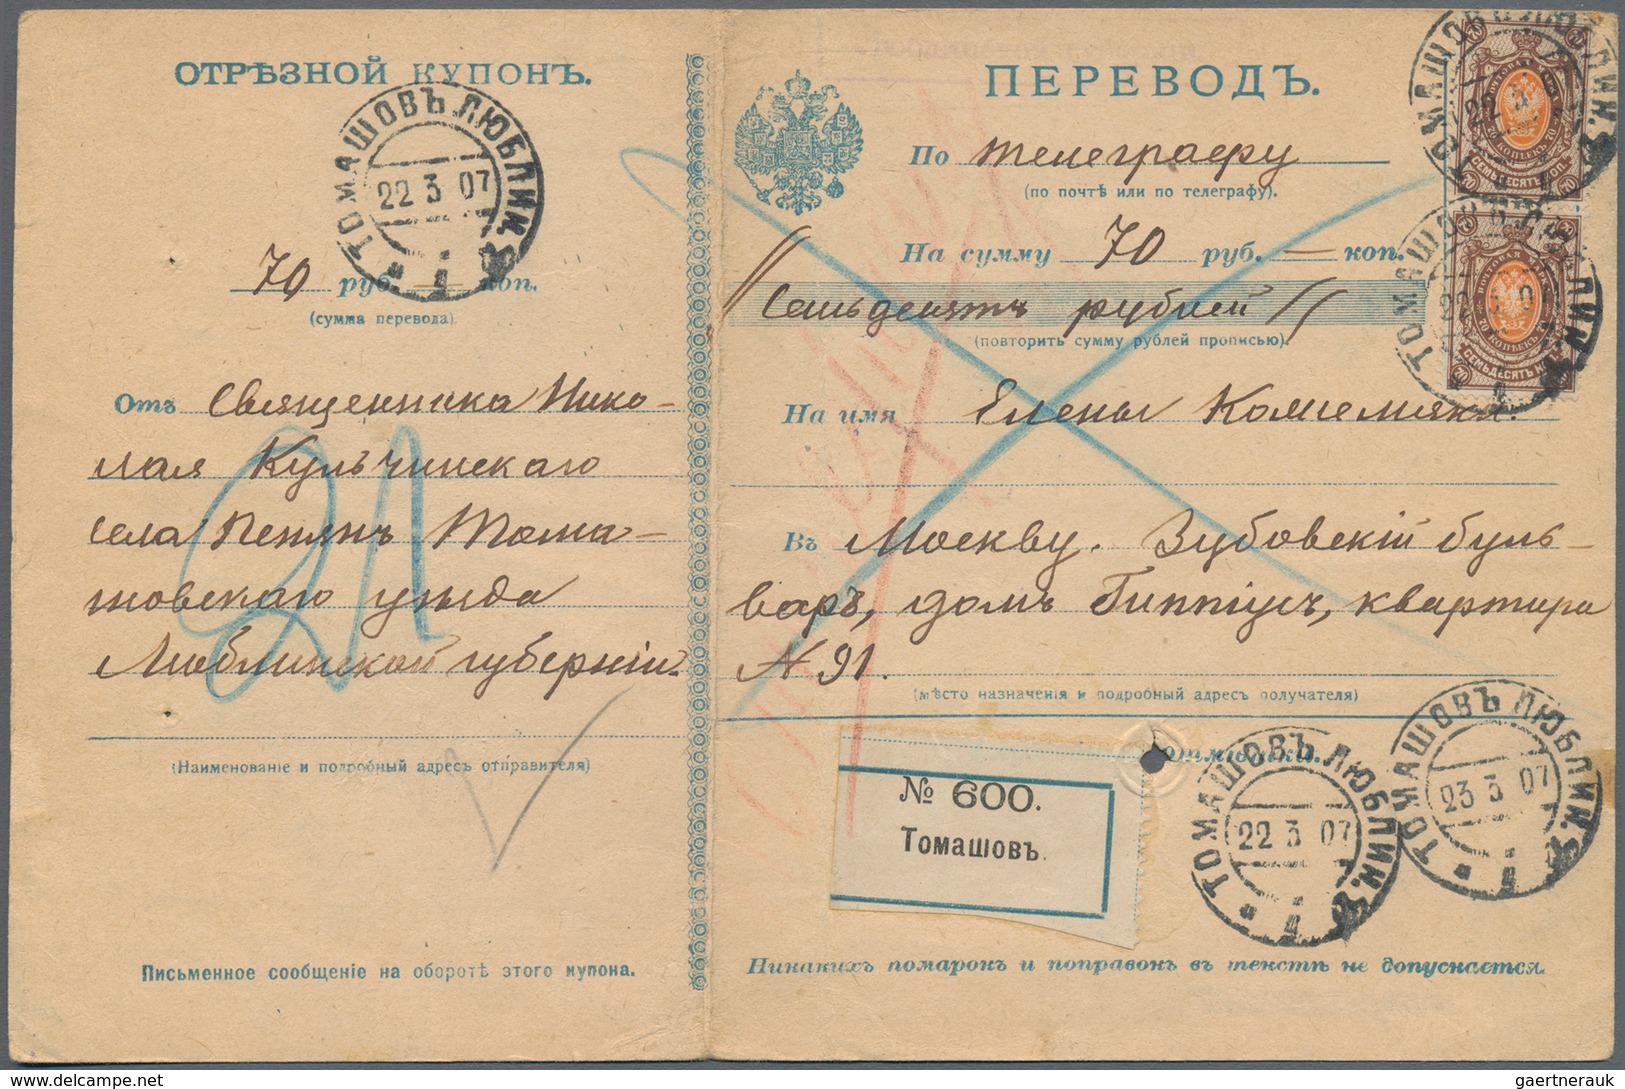 Polen - Russische Periode: 1889/1911 8 better items all send in Poland incl. rare white registration